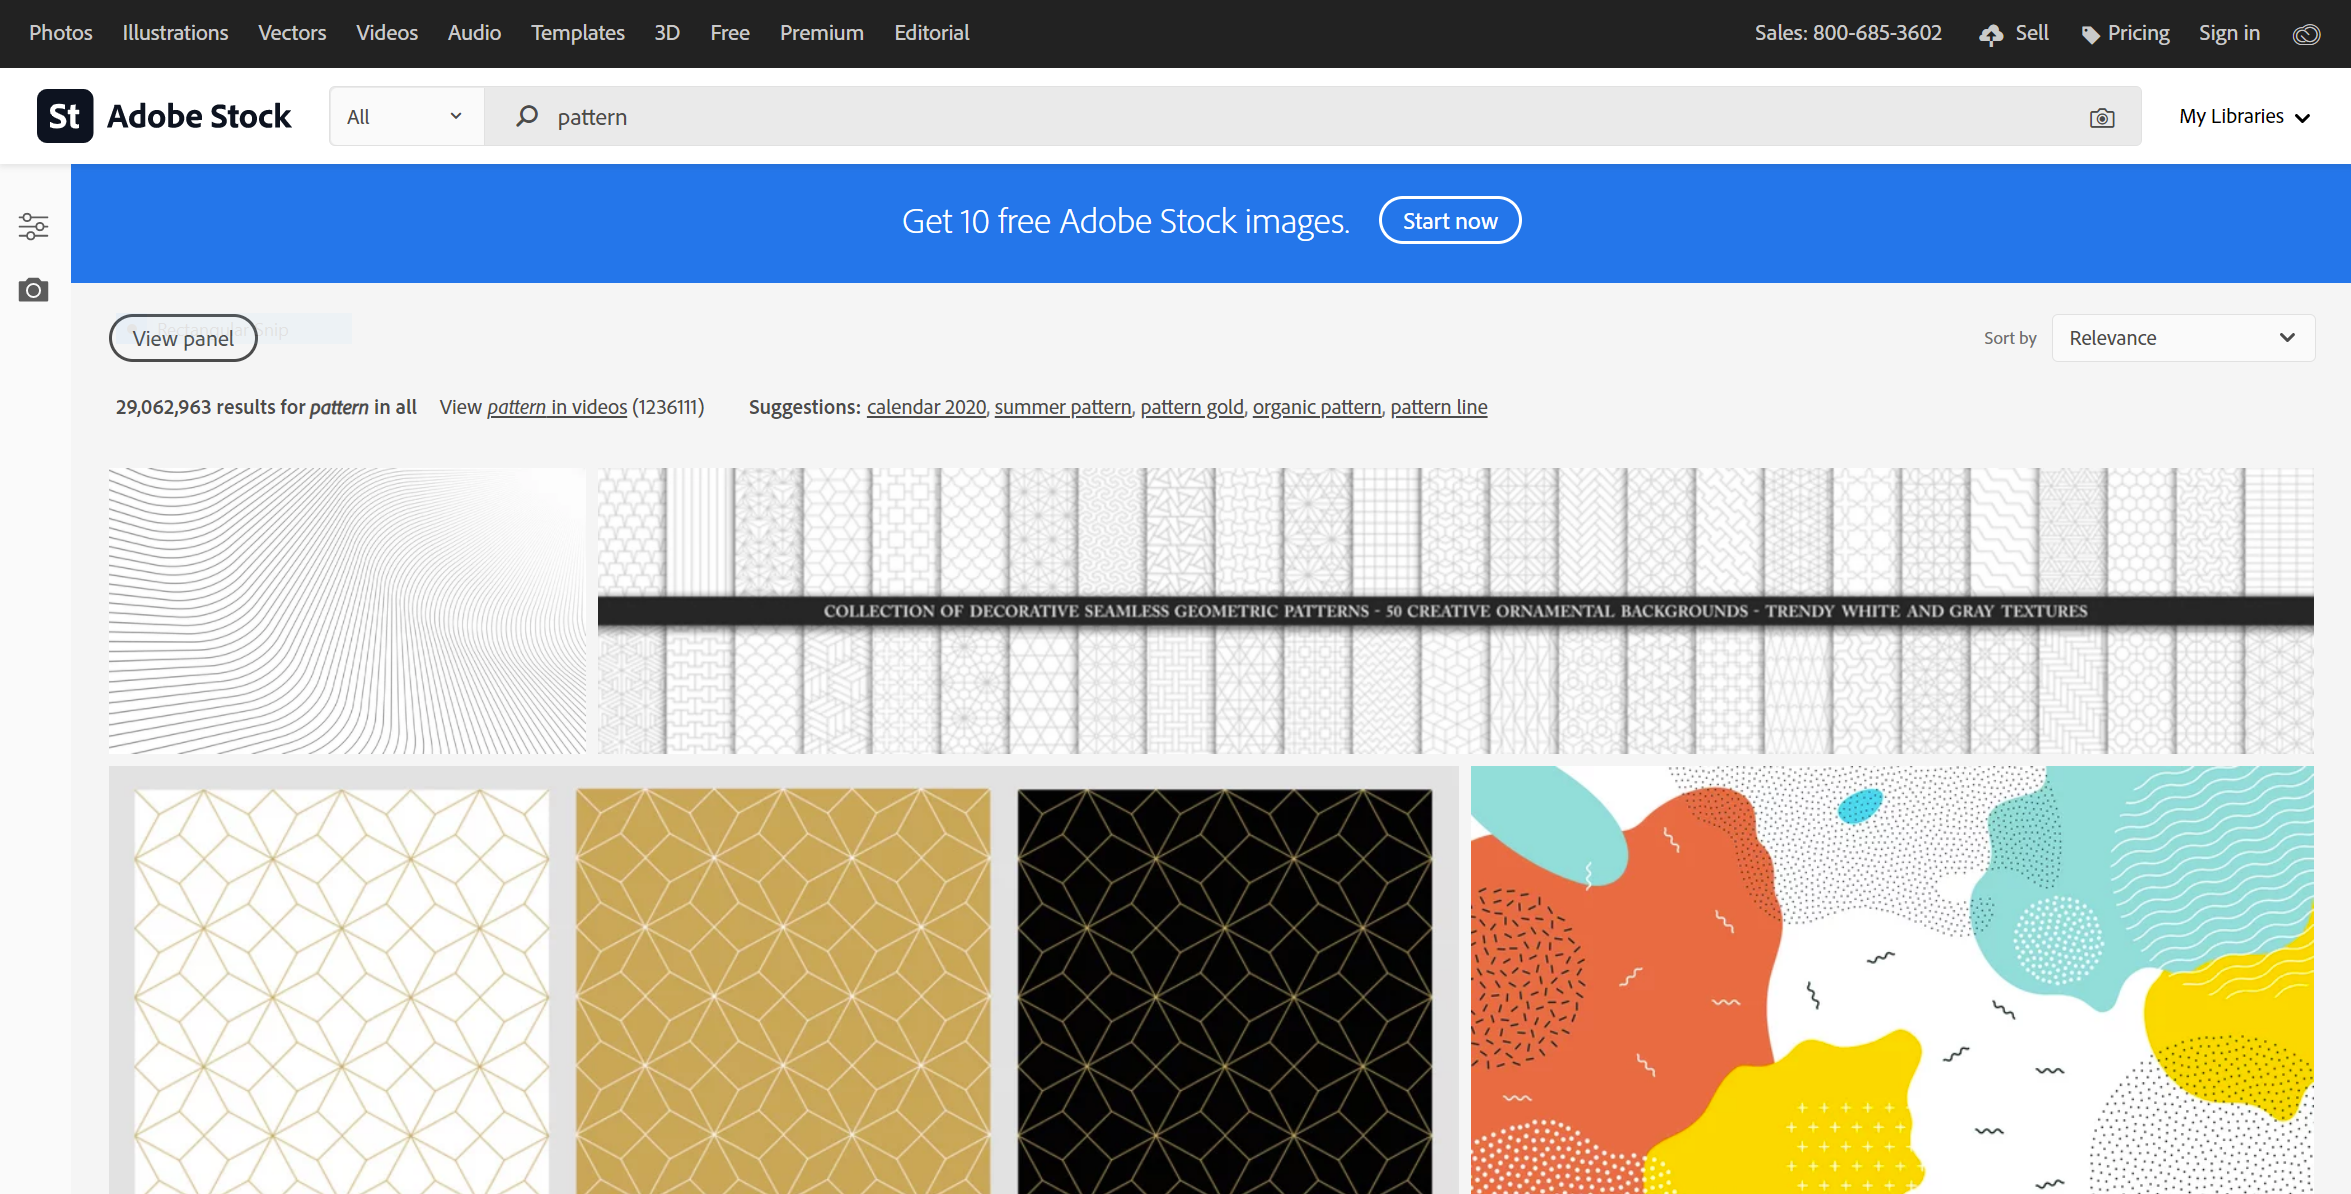 Adobe Stock is home to millions of stock patterns for your projects.